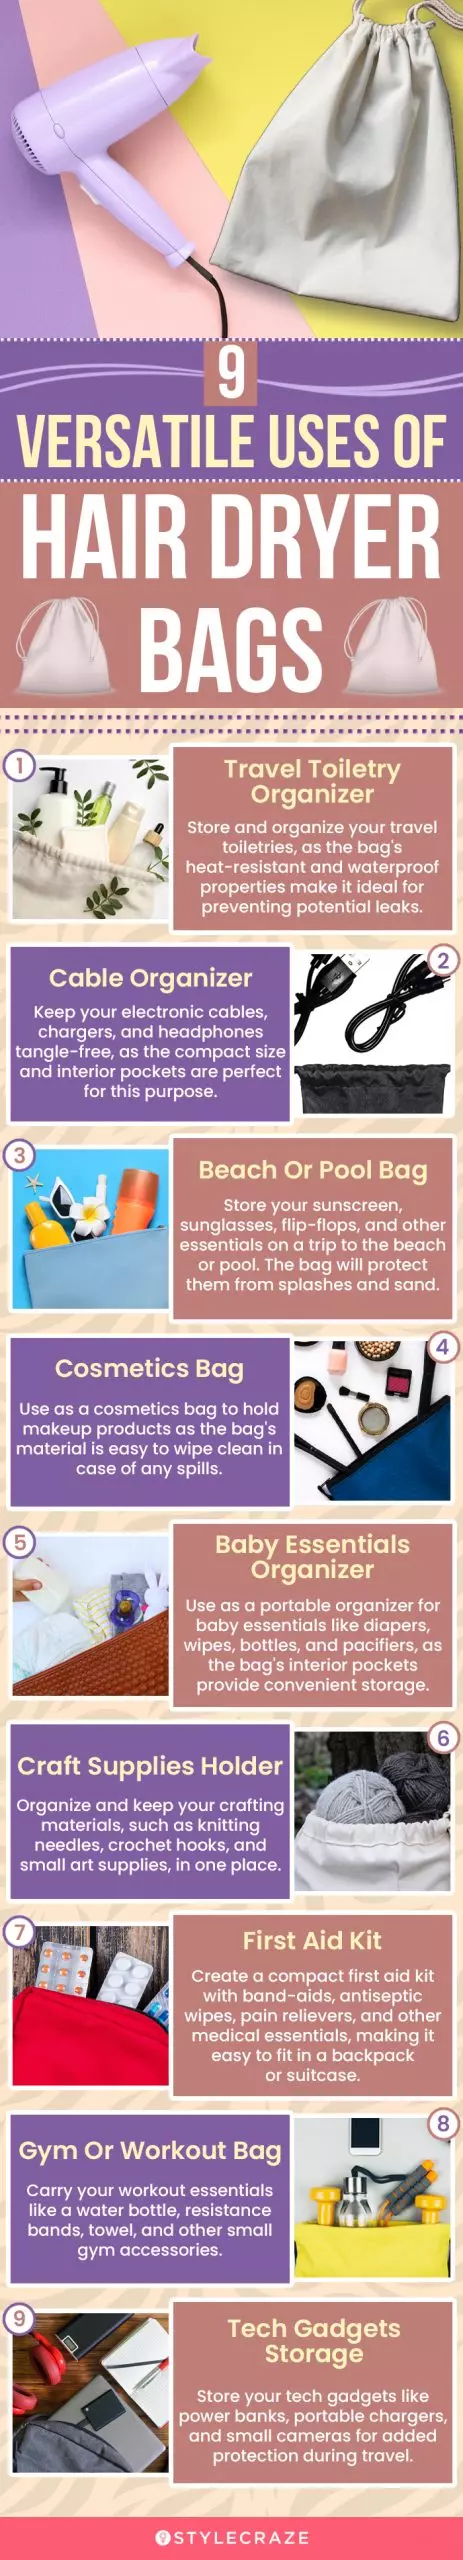 9 Versatile Uses Of Hair Dryer Bags (infographic)